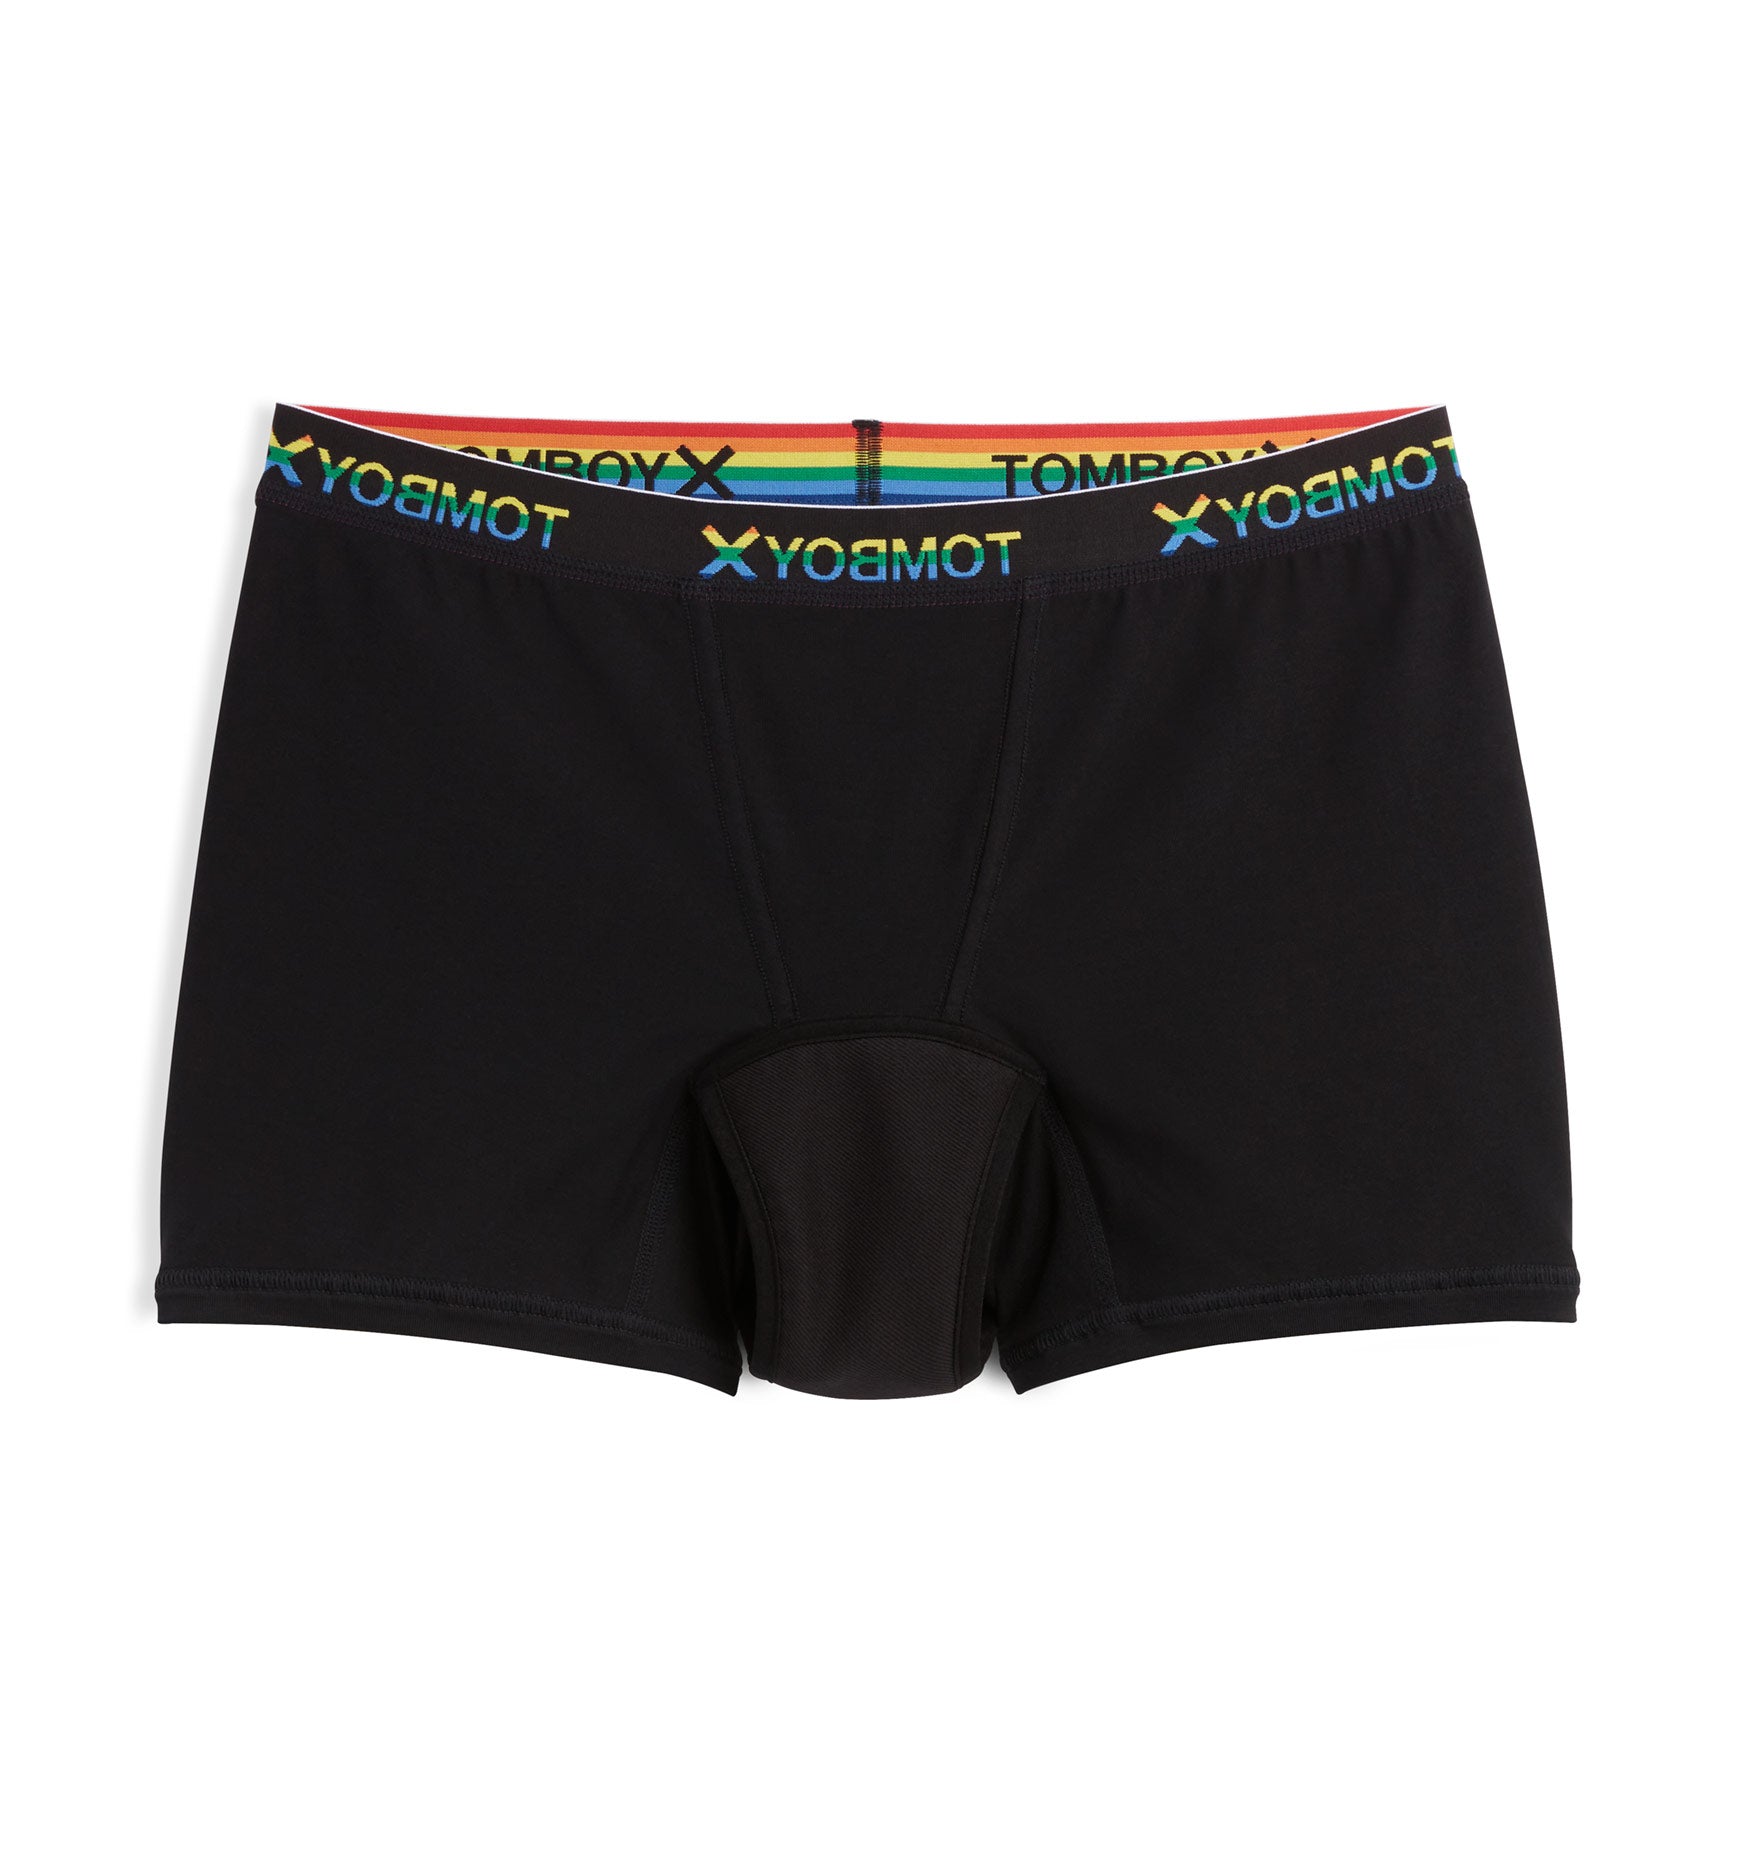 TomboyX First Line Period 9 Boxer Briefs - X= Black on Marmalade